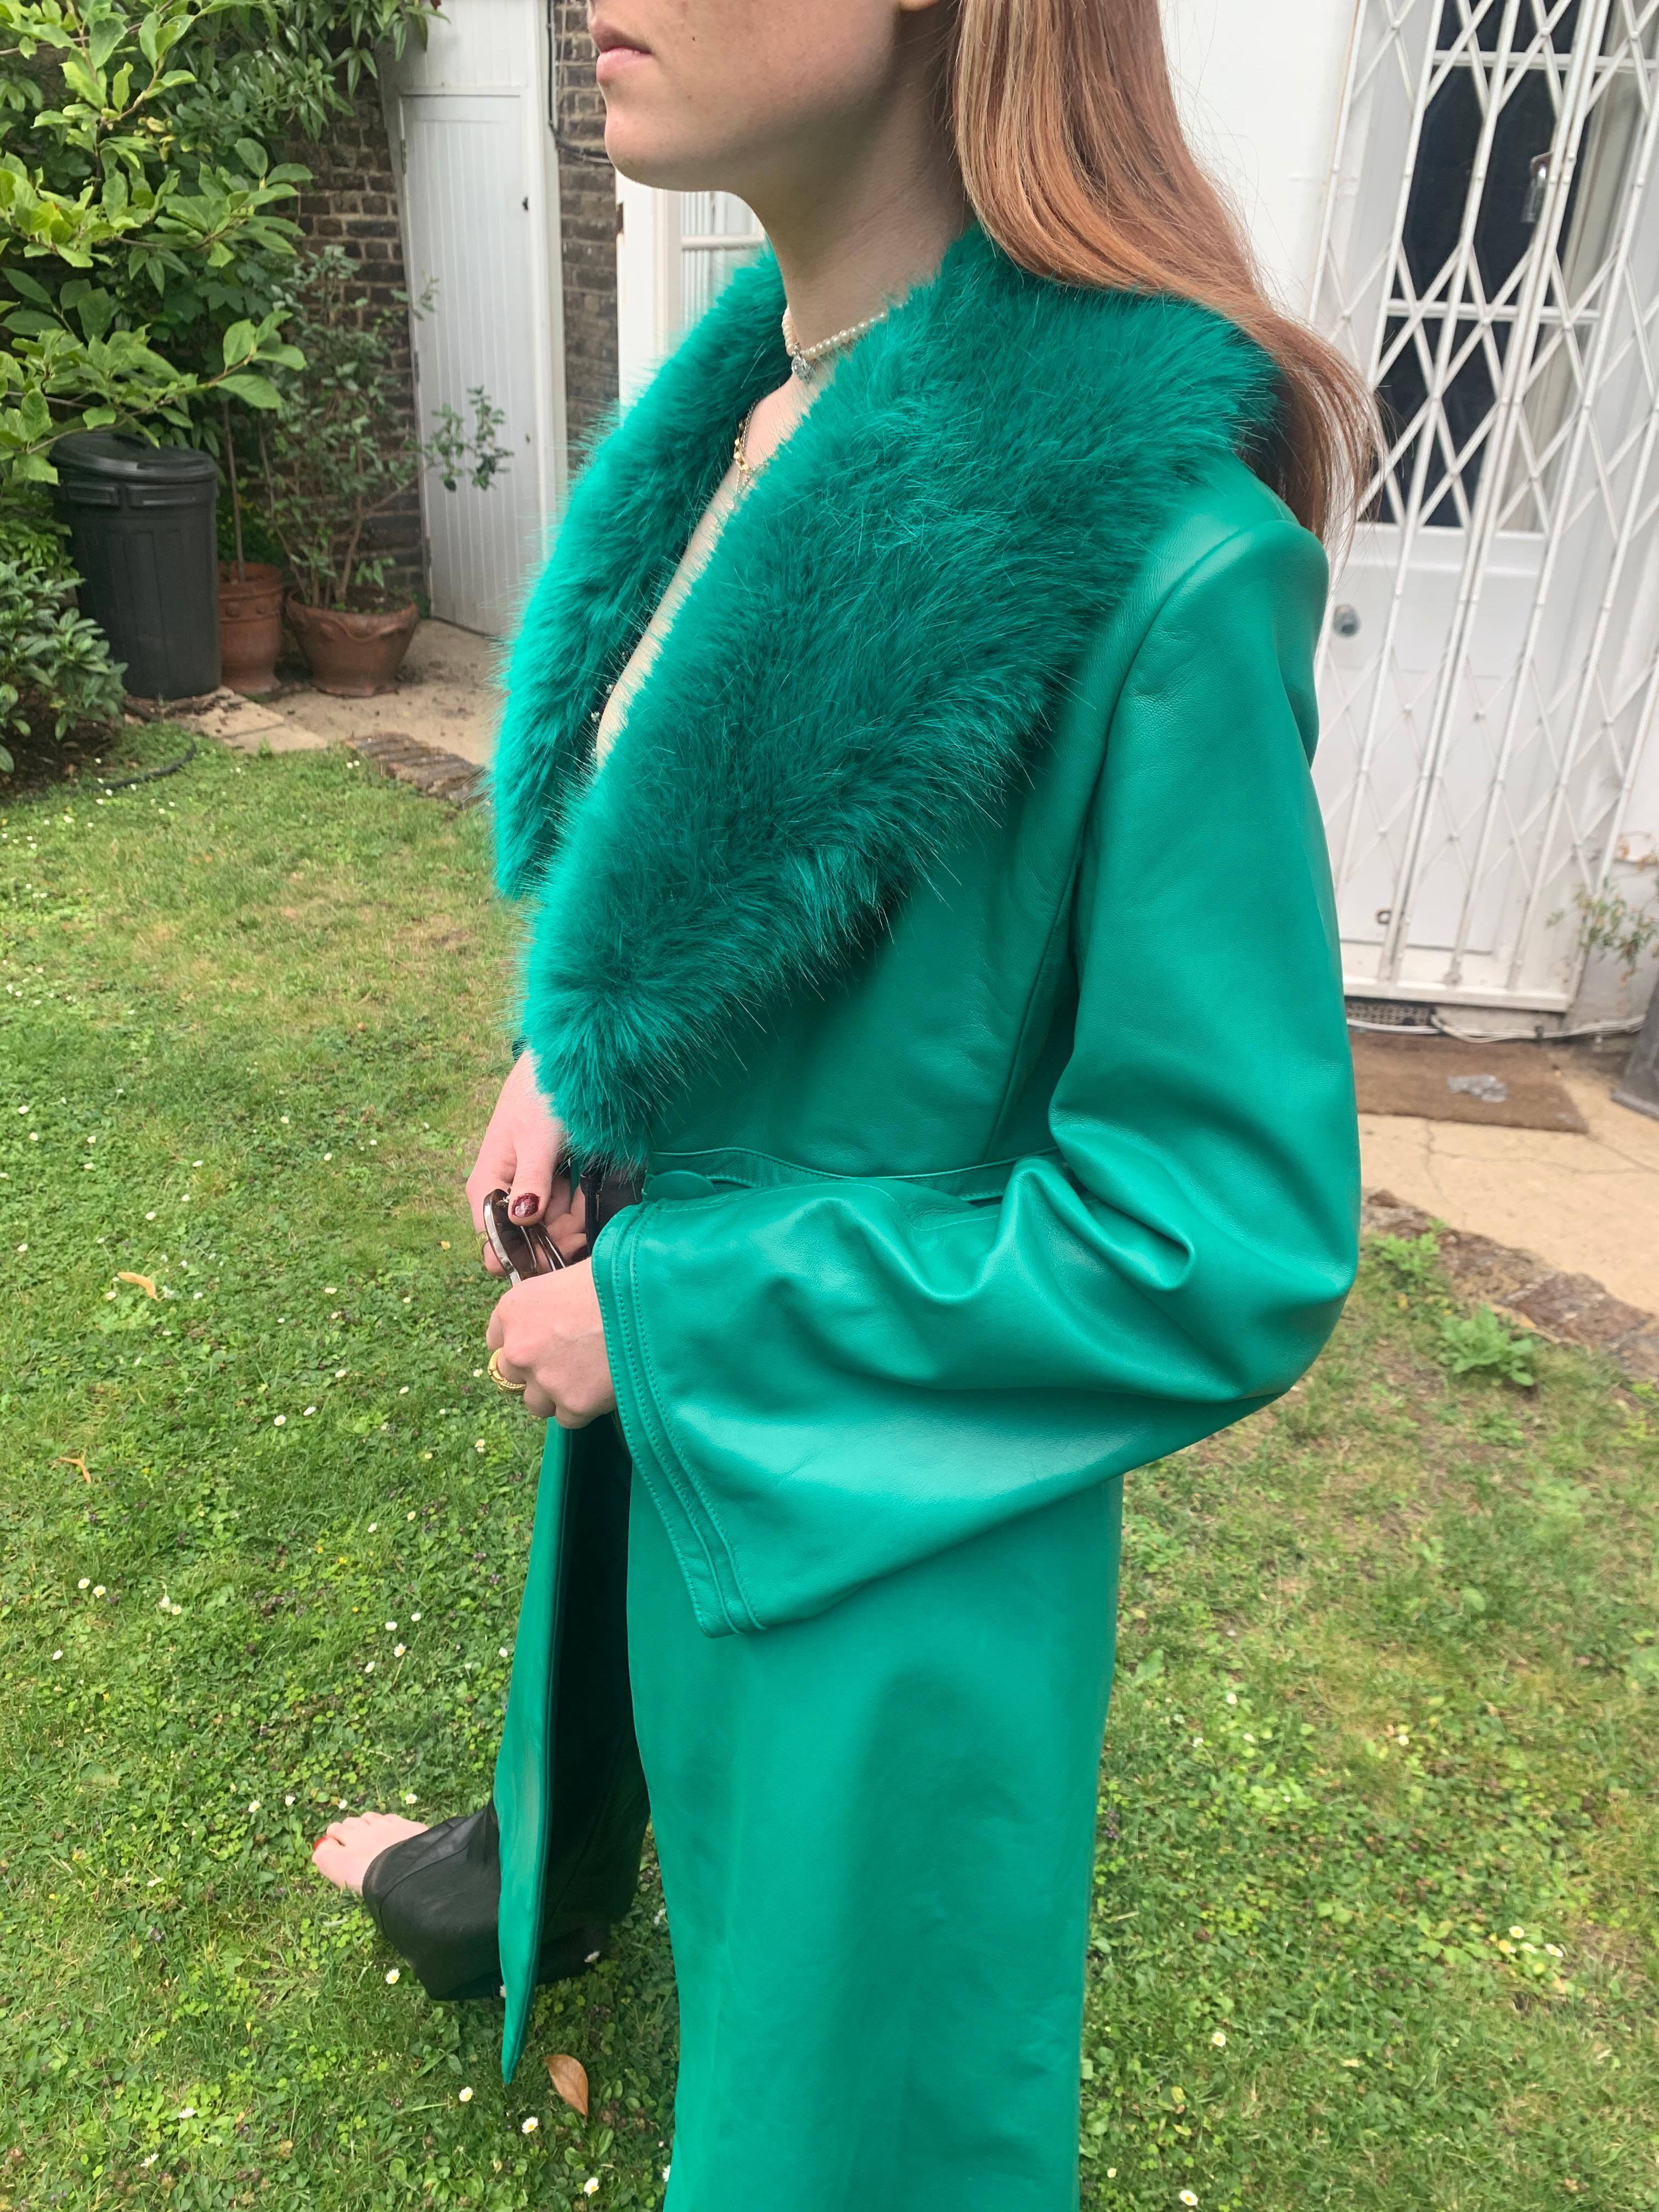 Verheyen London Edward Leather Coat in Emerald Green & Green Faux Fur - Size 12 UK 

The Edward Leather Coat created by Verheyen London is a romantic design inspired by the 1970s and Edwardian Era of Fashion.  A timeless design to be be worn for a